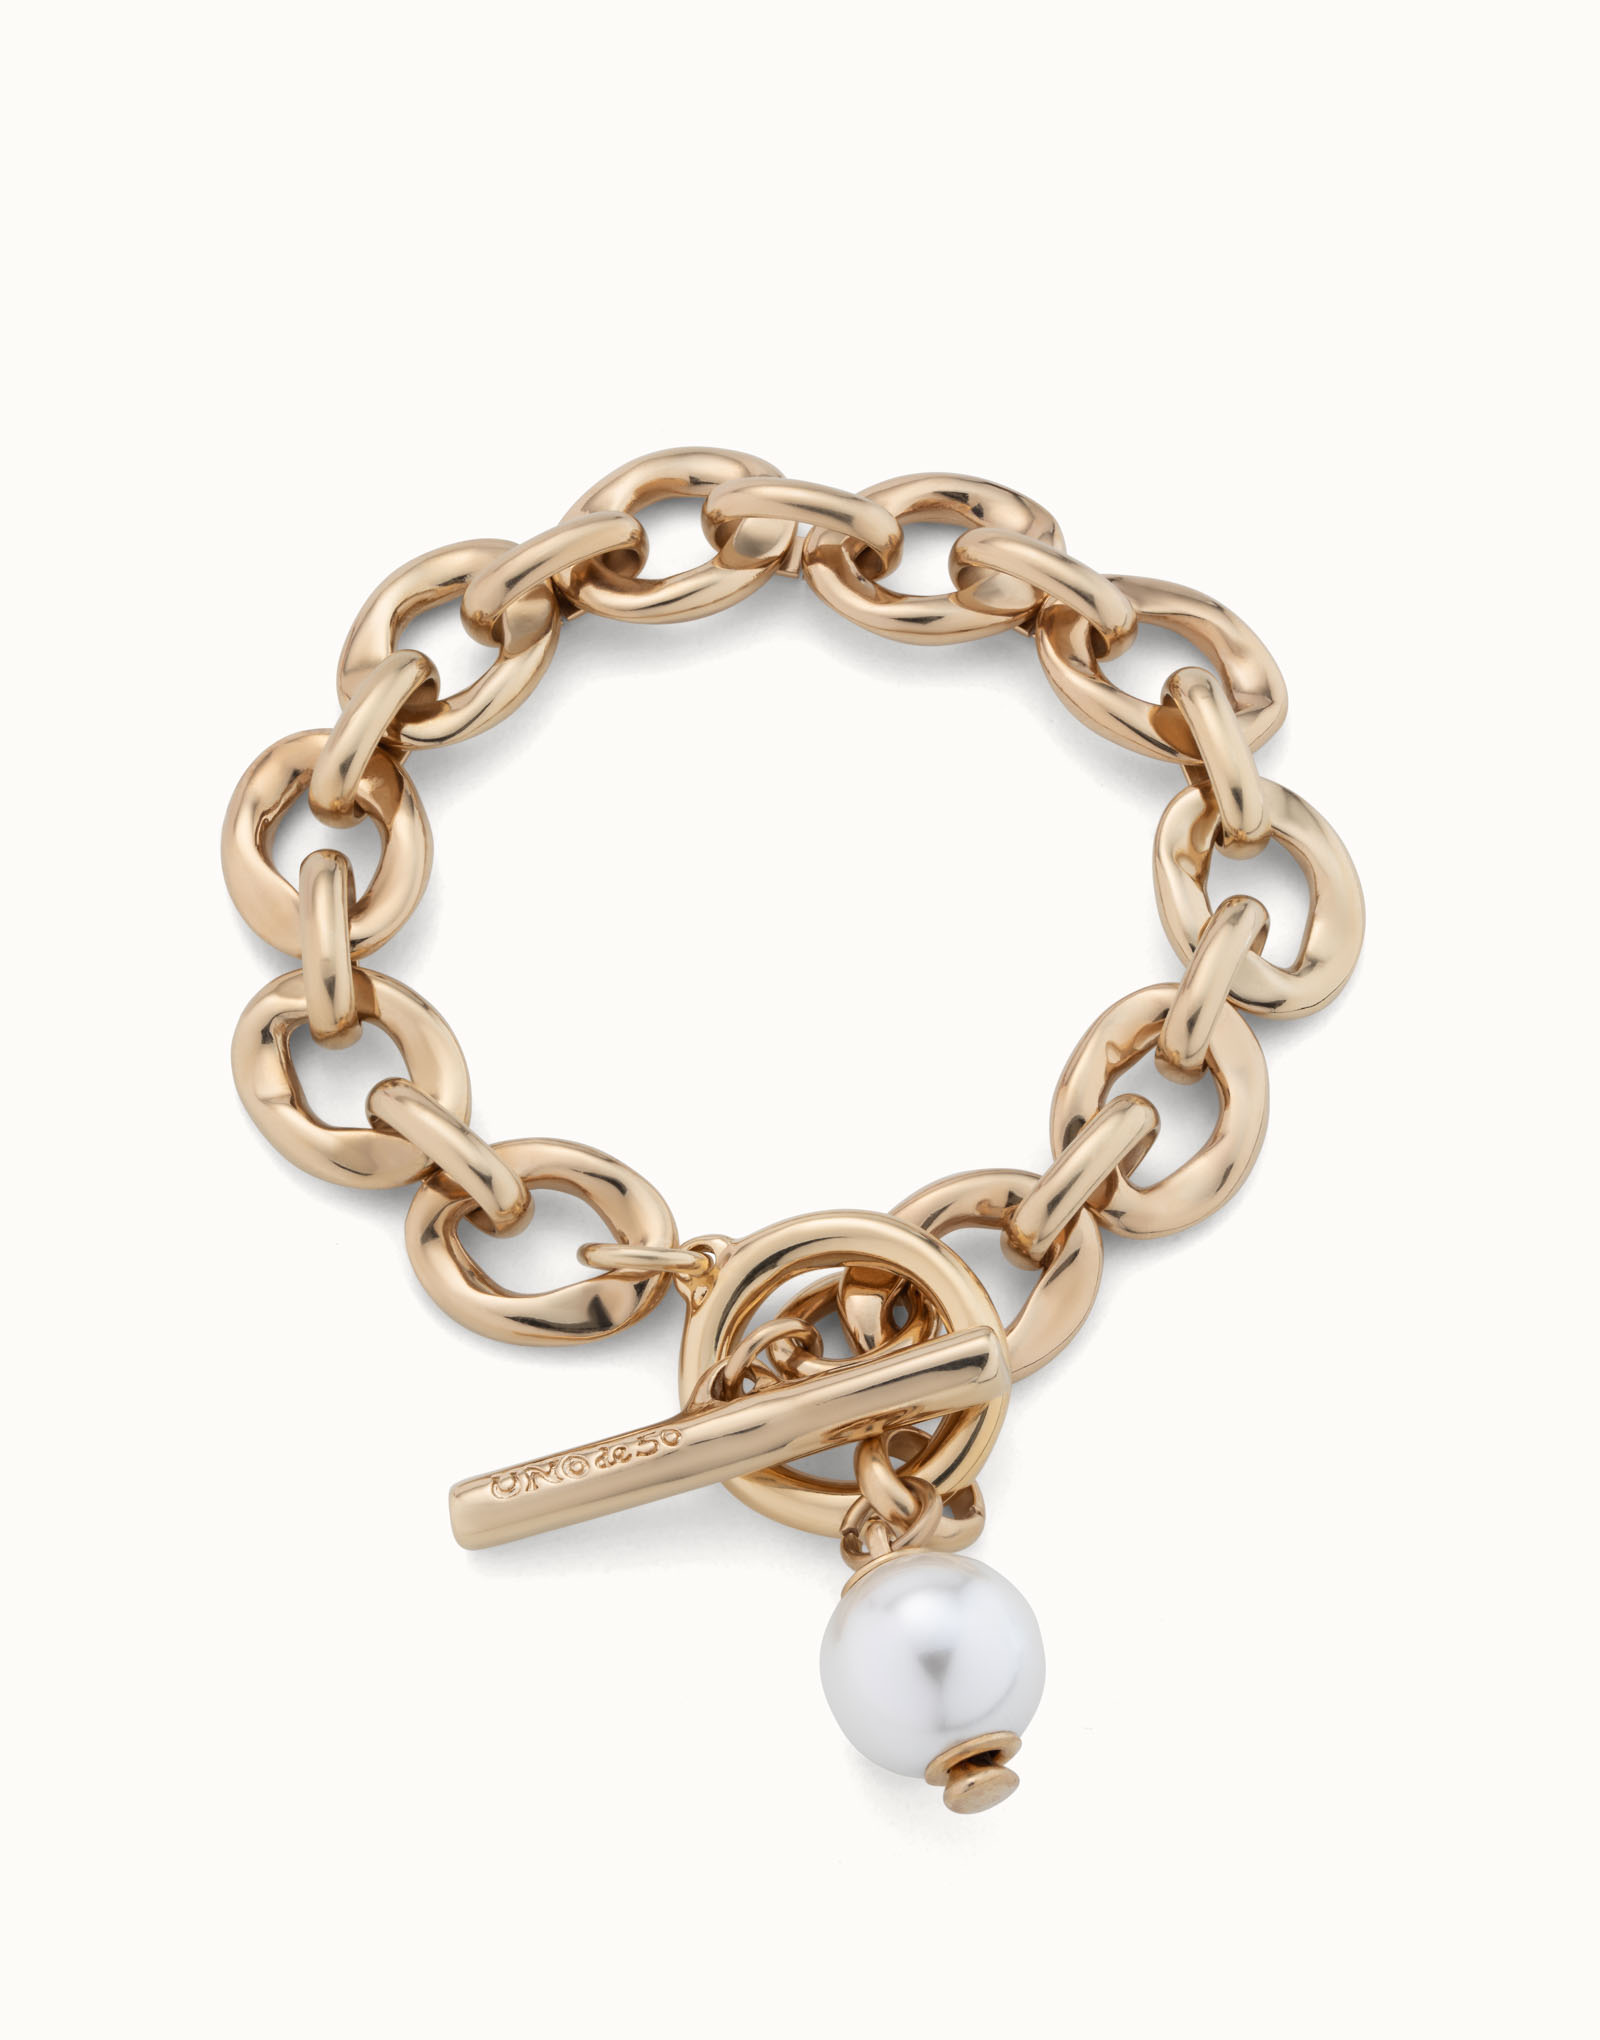 18K gold-plated bracelet with links and pearl charm, Golden, large image number null